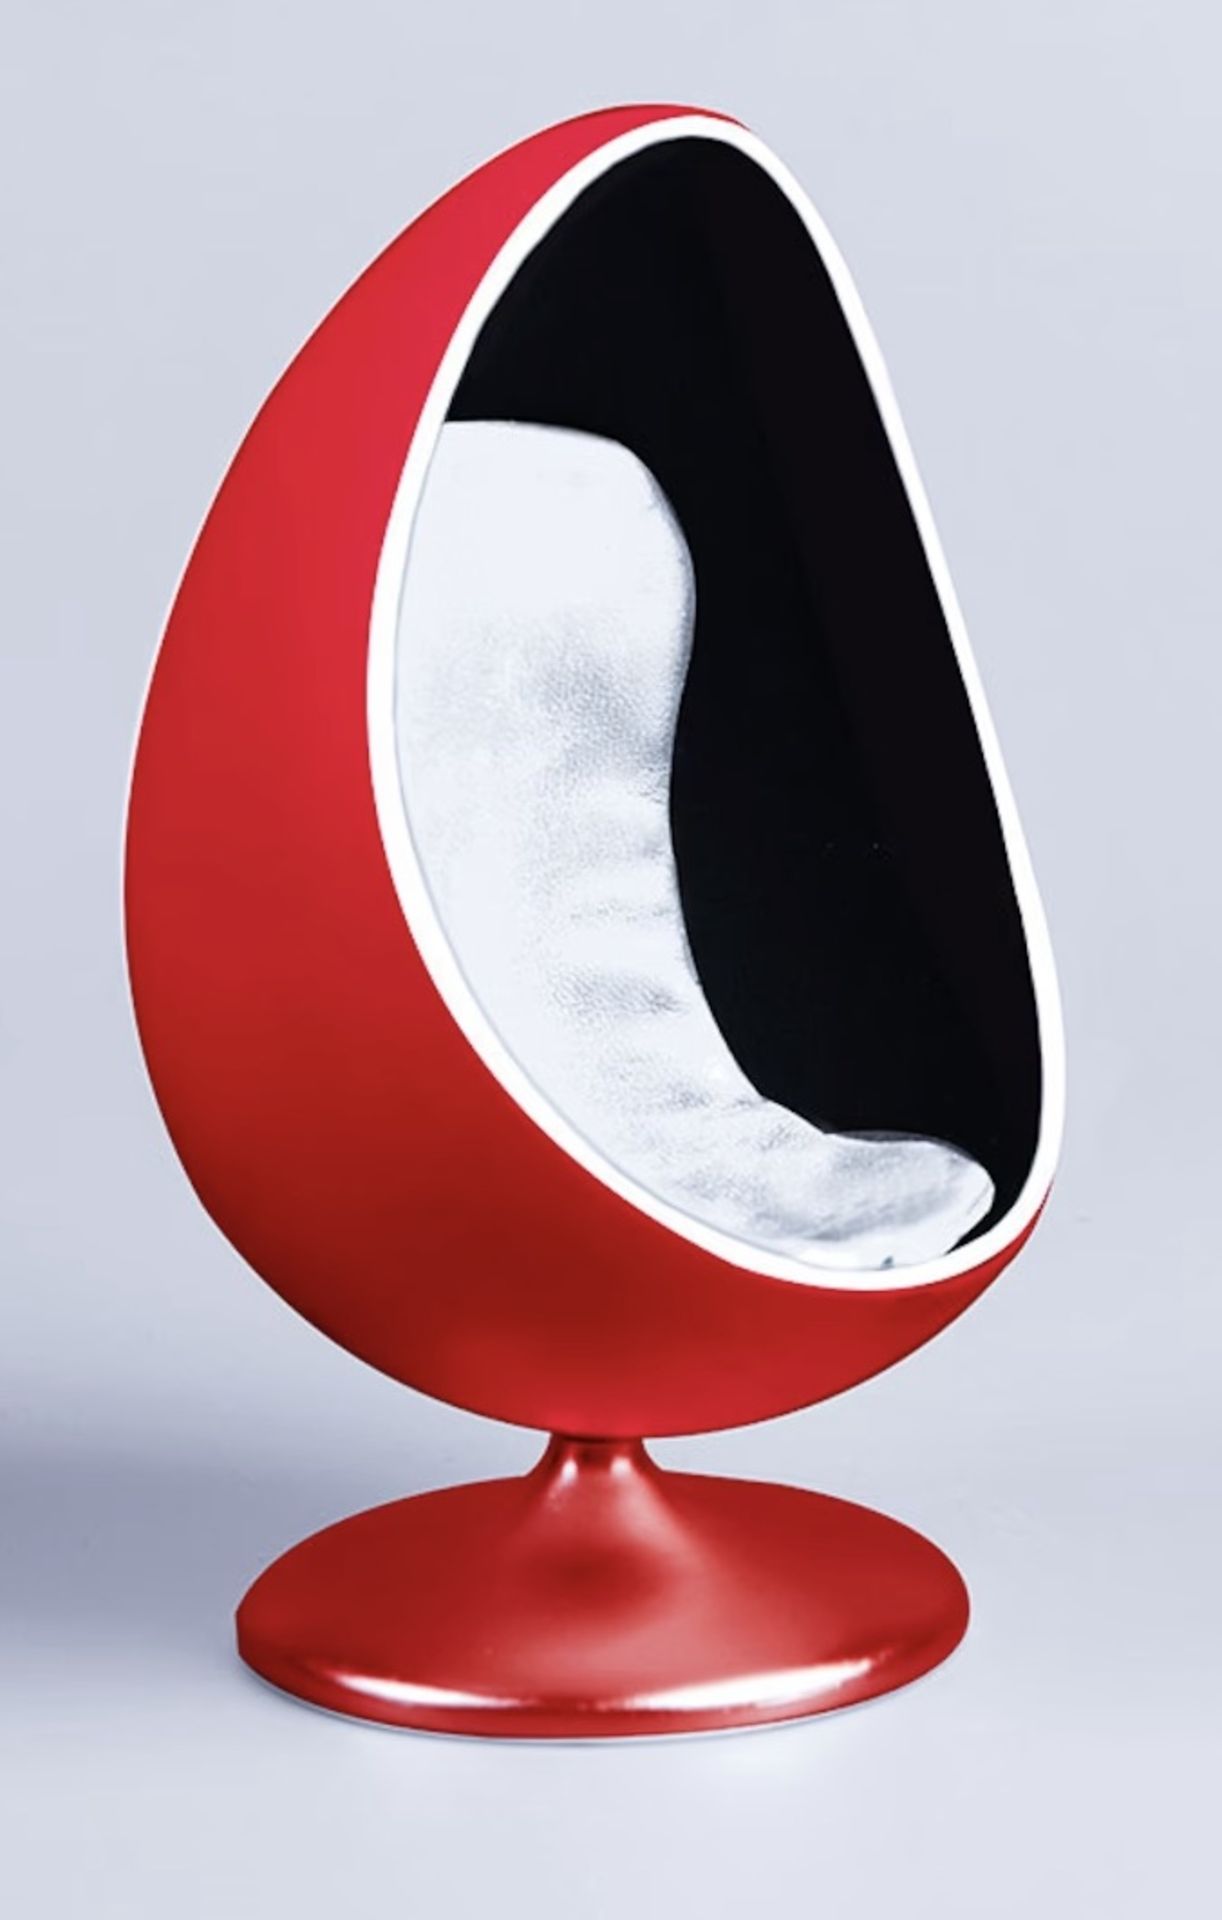 Set of Four 1/12 Scale Egg Chairs - Image 4 of 6